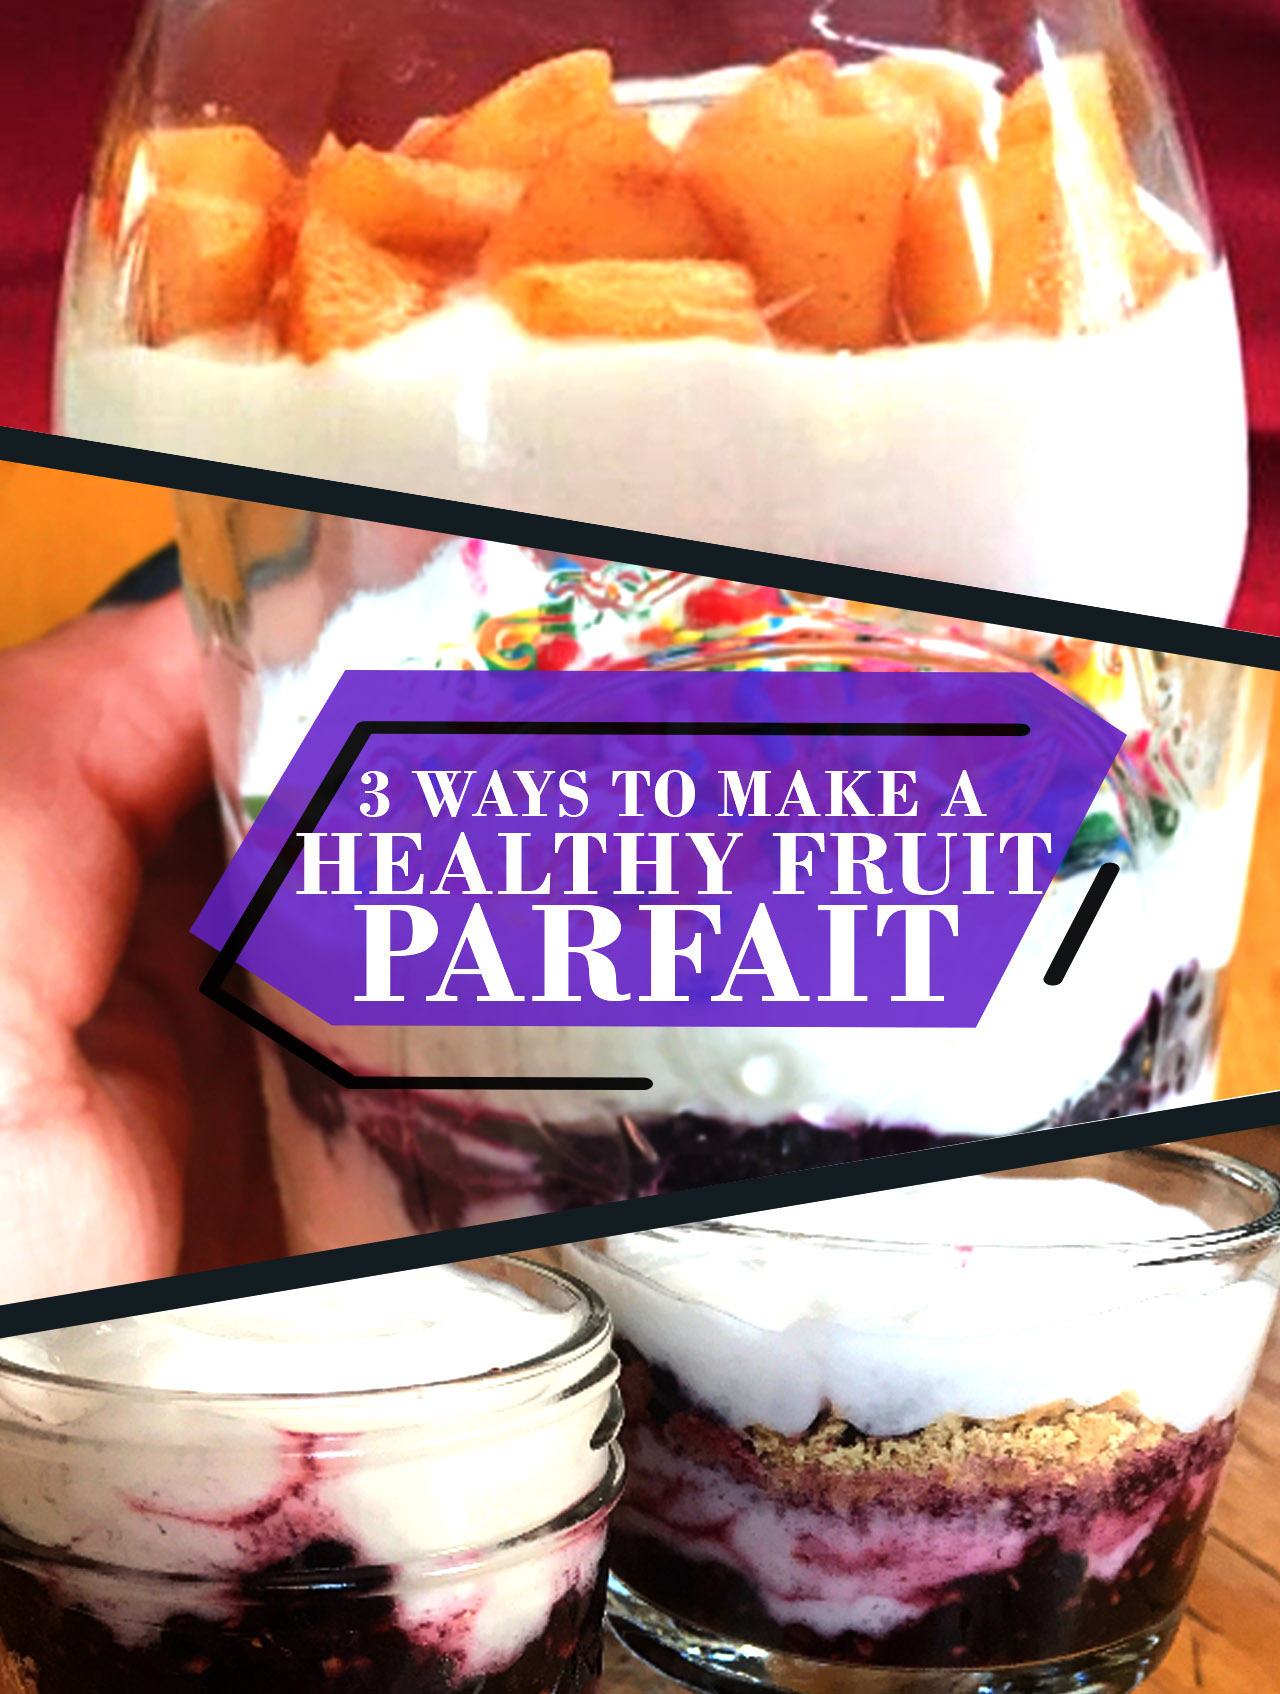 3 different parfaits with fruit and yogurt